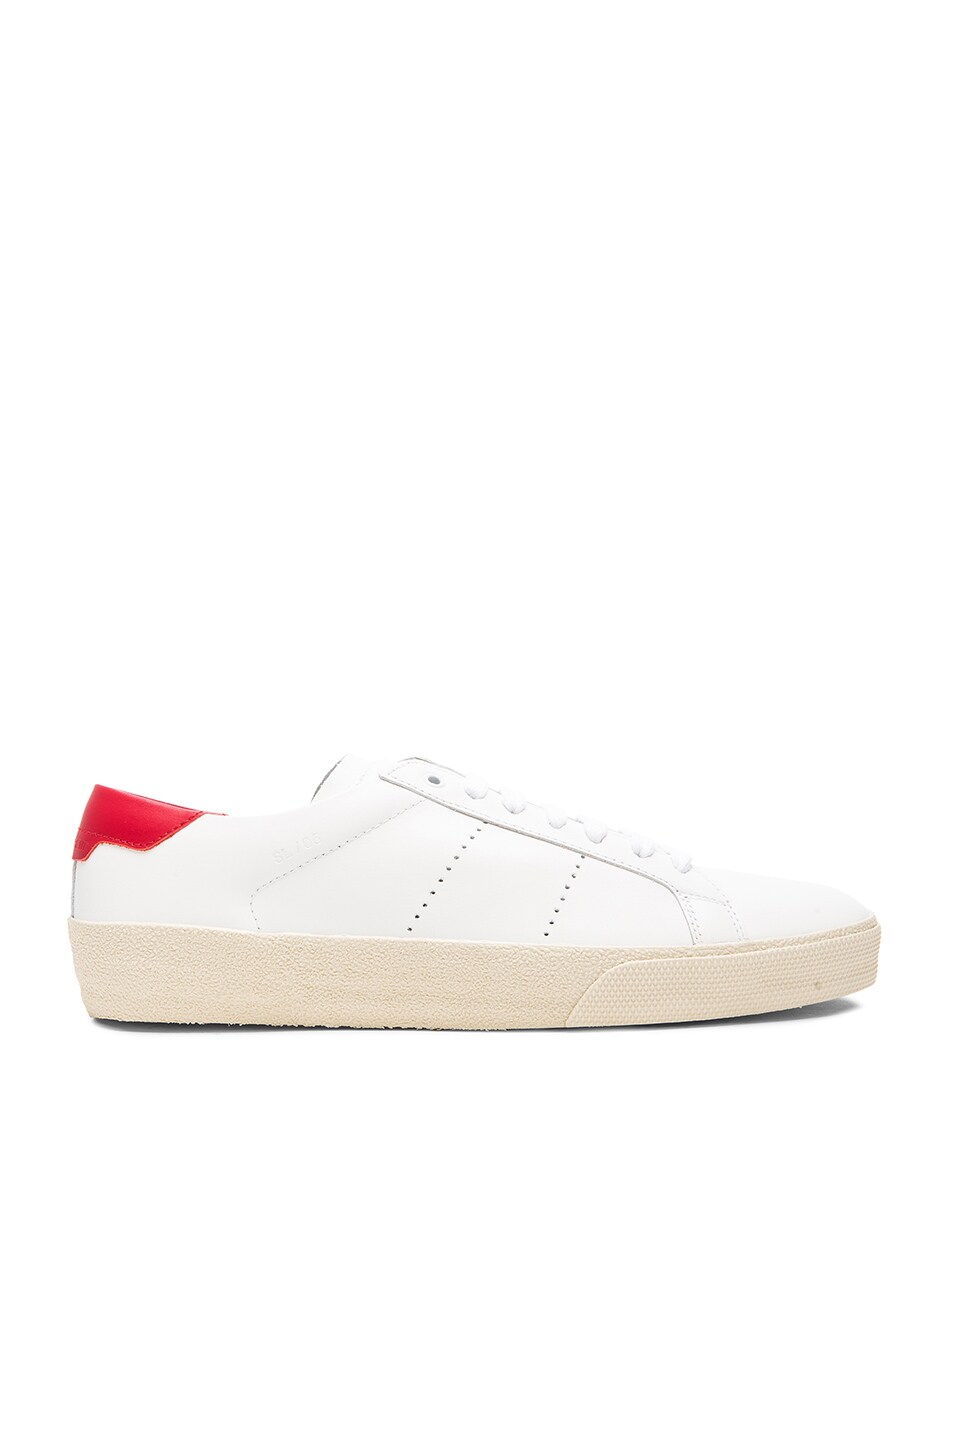 Image 1 of Saint Laurent Court Classic Leather Sneakers in Rouge & White